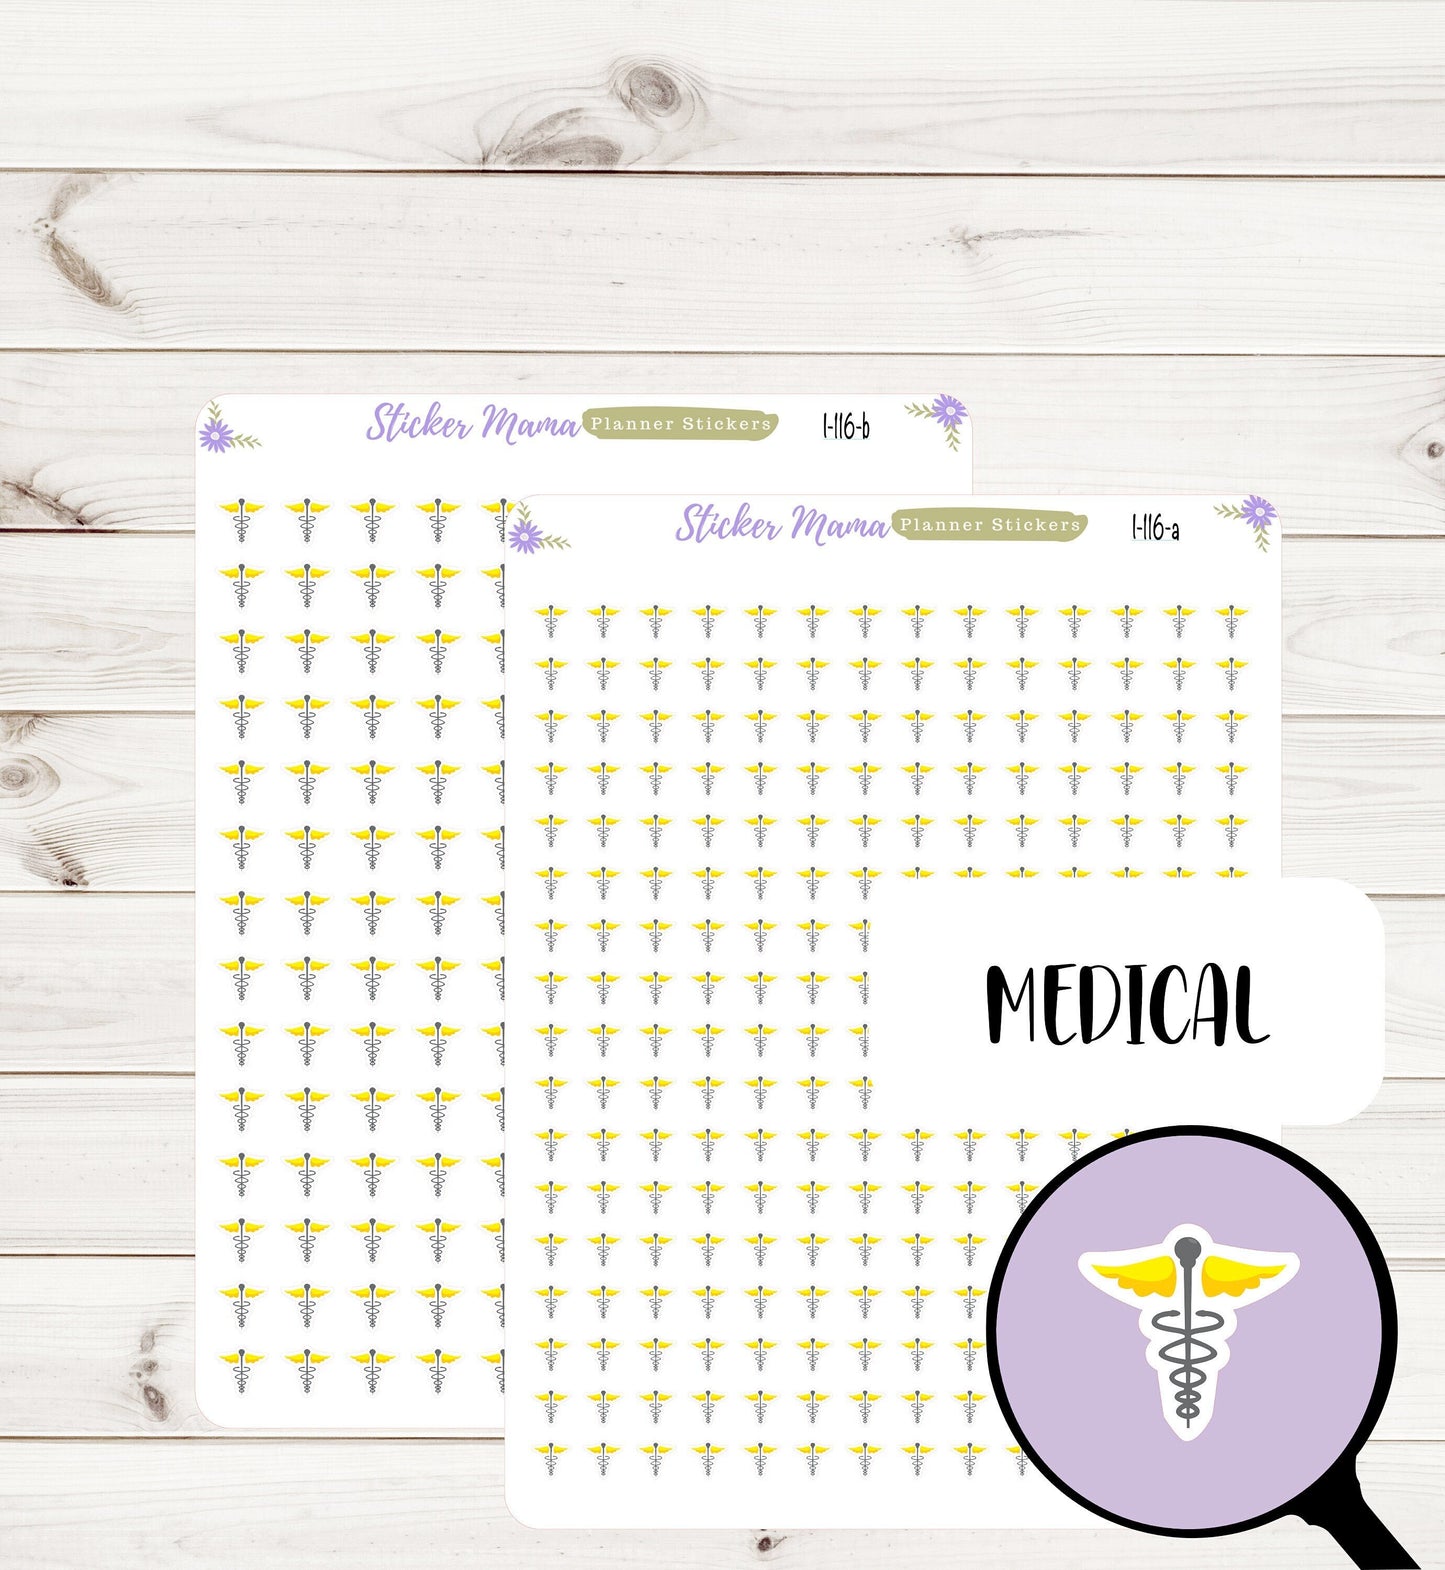 I-116 MEDICAL PLANNER Stickers || Sugar Stickers || Blood Sugar Stickers || Health Care Stickers